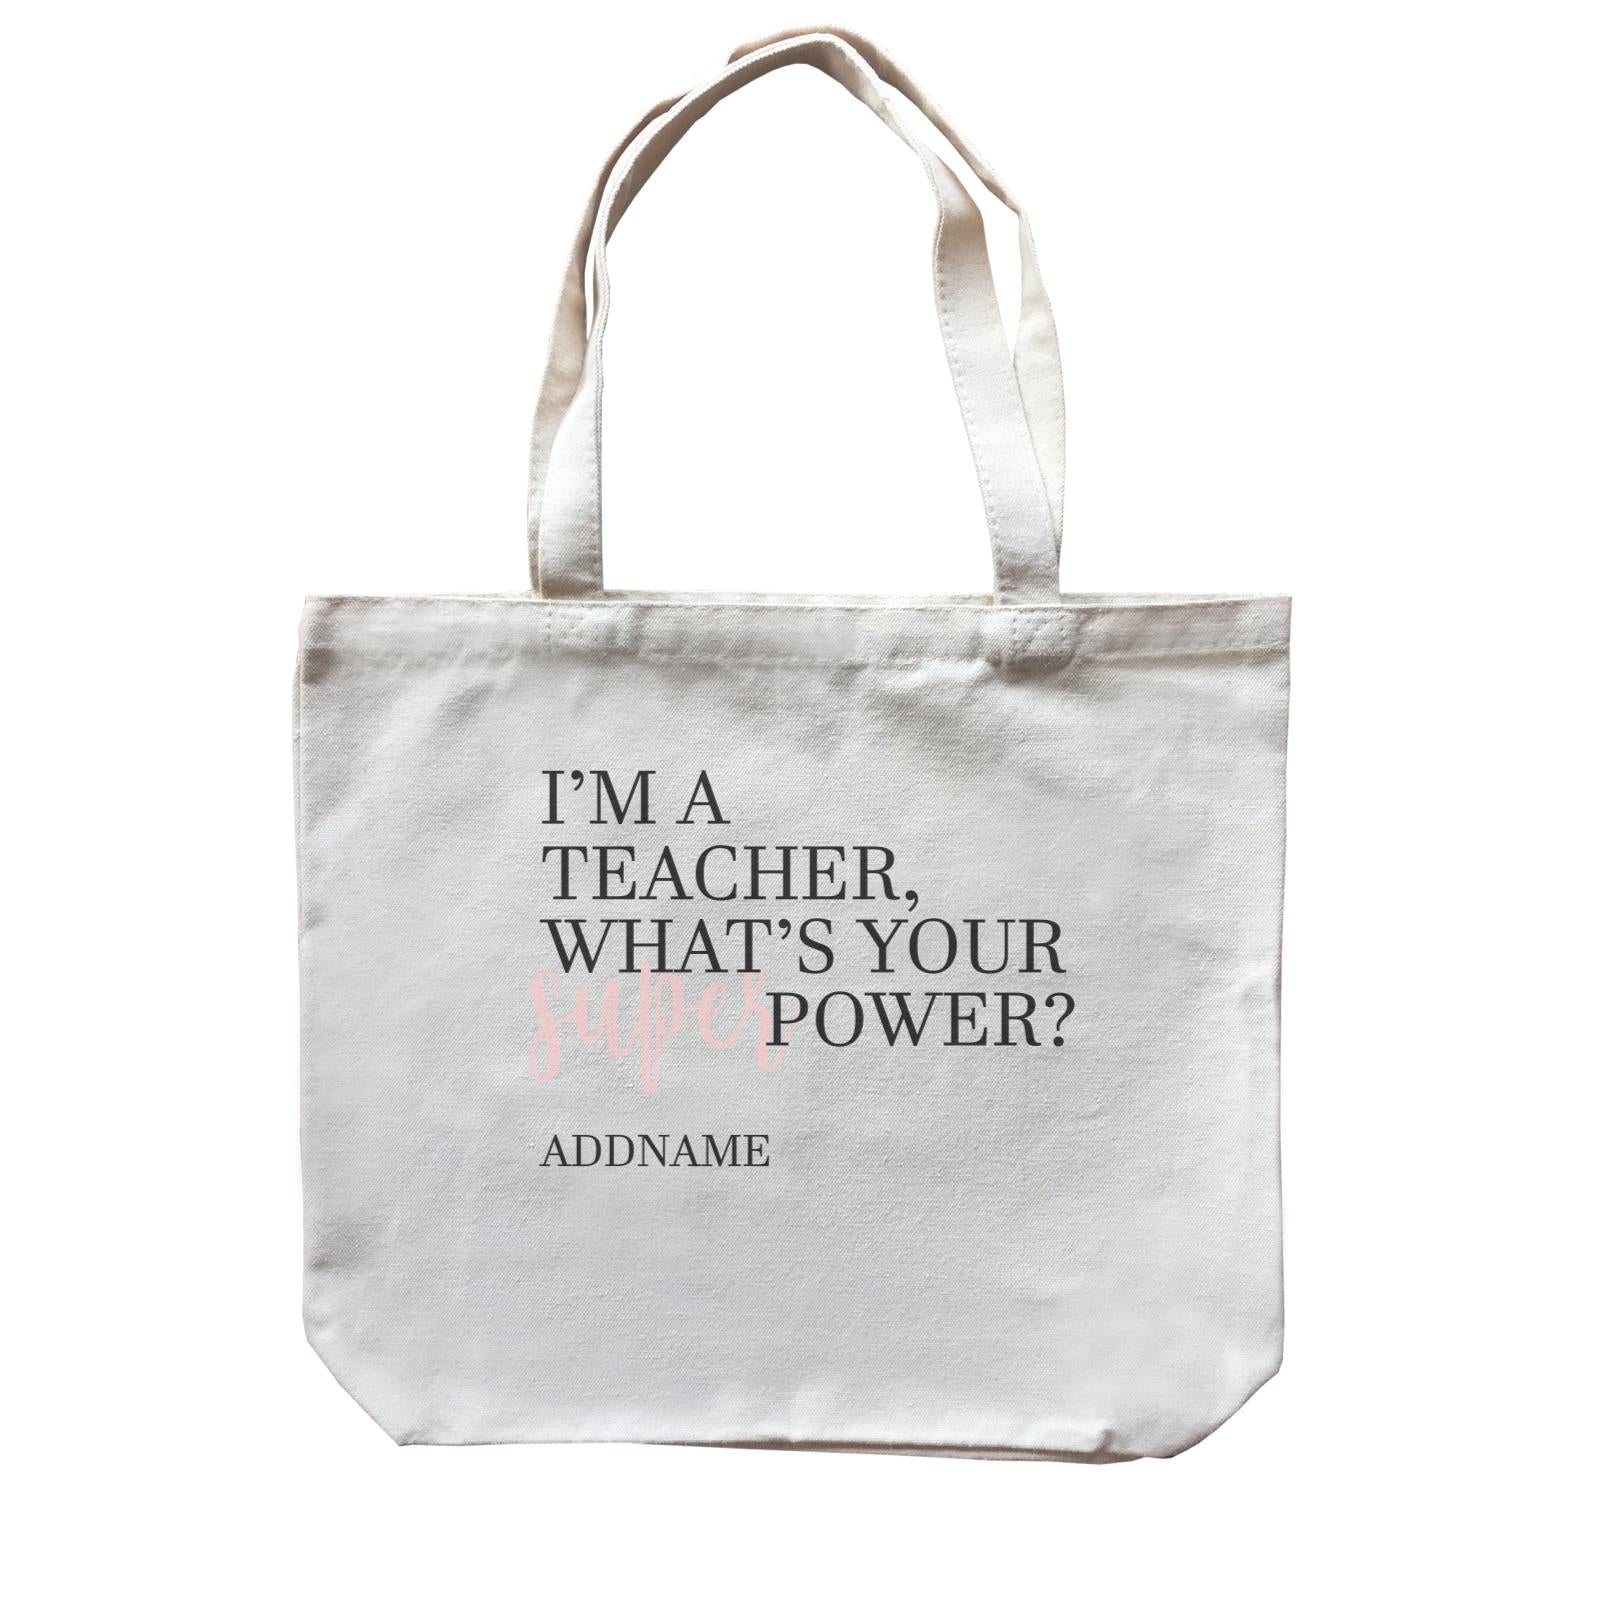 Super Teachers Pink I'm A teacher What's Your Superpower Addname Canvas Bag